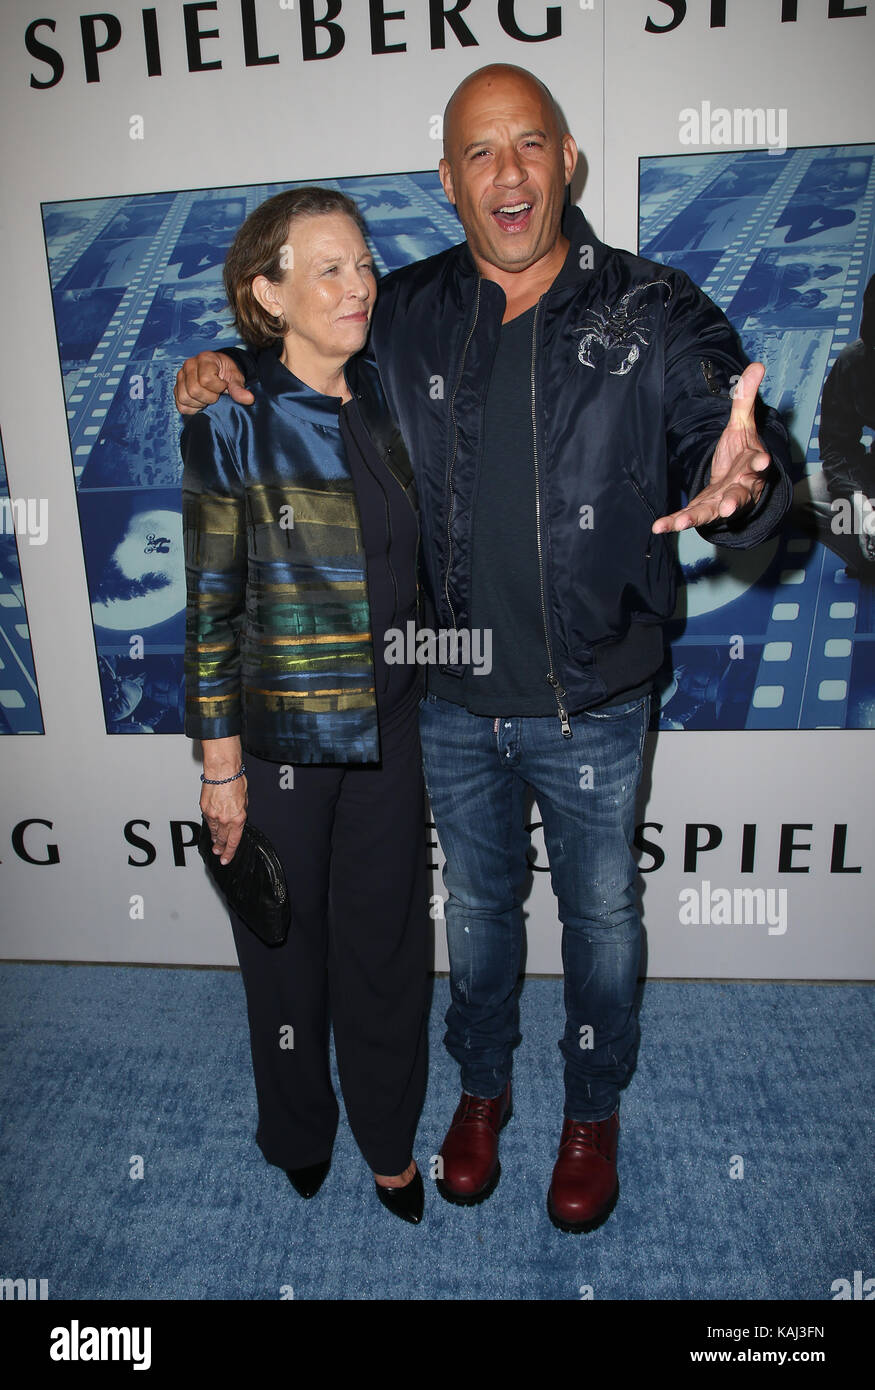 Hollywood, California, USA. 26th Sep, 2017. Delora Vincent, Vin Diesel, at HBO'S DOCUMNETARY FILMS SPIELBERG LA PREMIERE at Paramount Studios on September 26, 2017 in Los Angeles, California. Credit: Faye Sadou/Media Punch/Alamy Live News Stock Photo